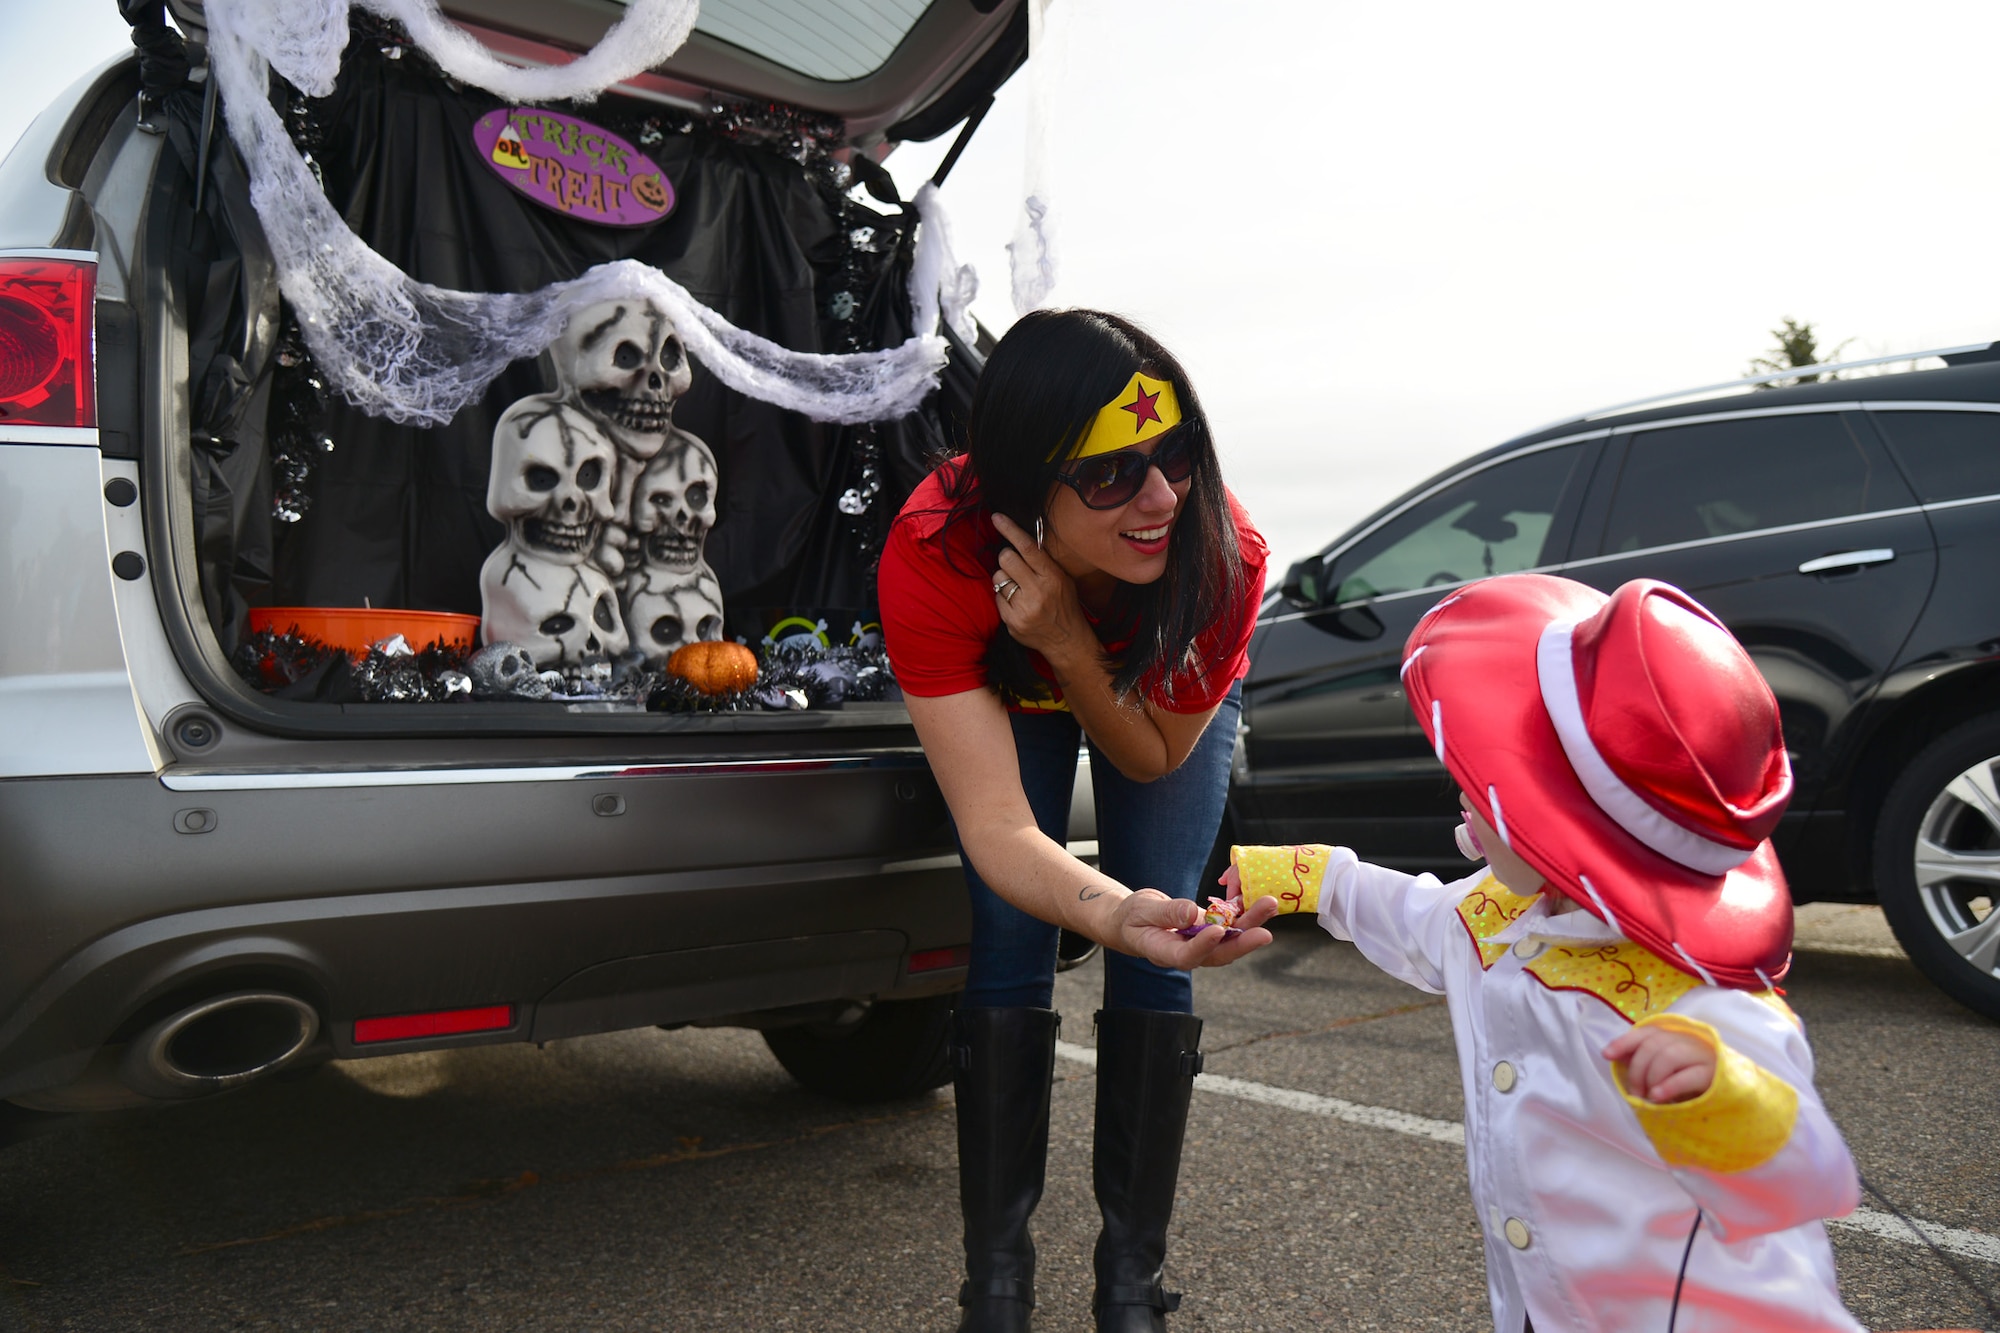 The Malmstrom Spouse’s Club held a trunk-or-treat event Oct 24, 2015, at Malmstrom Air Force Base, Mont. The event brought together Airmen and families and allowed everyone to become more involved with things happening on base. (U.S. Air Force photo/Airman Daniel Brosam)